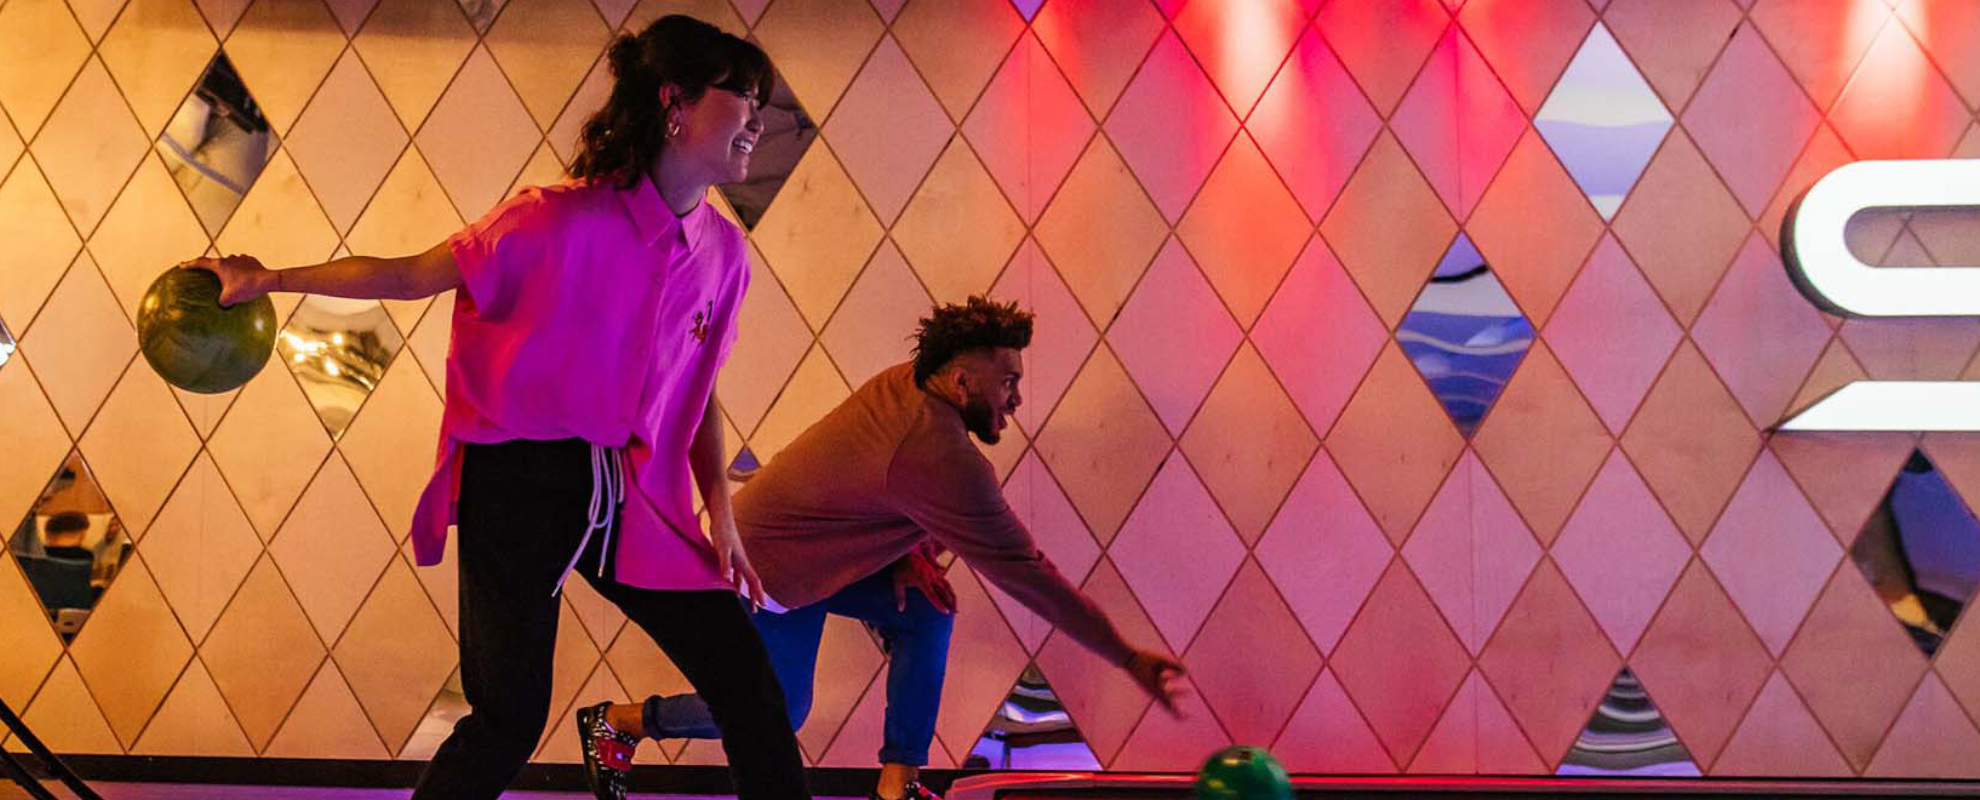 Man and a woman rolling a bowling ball